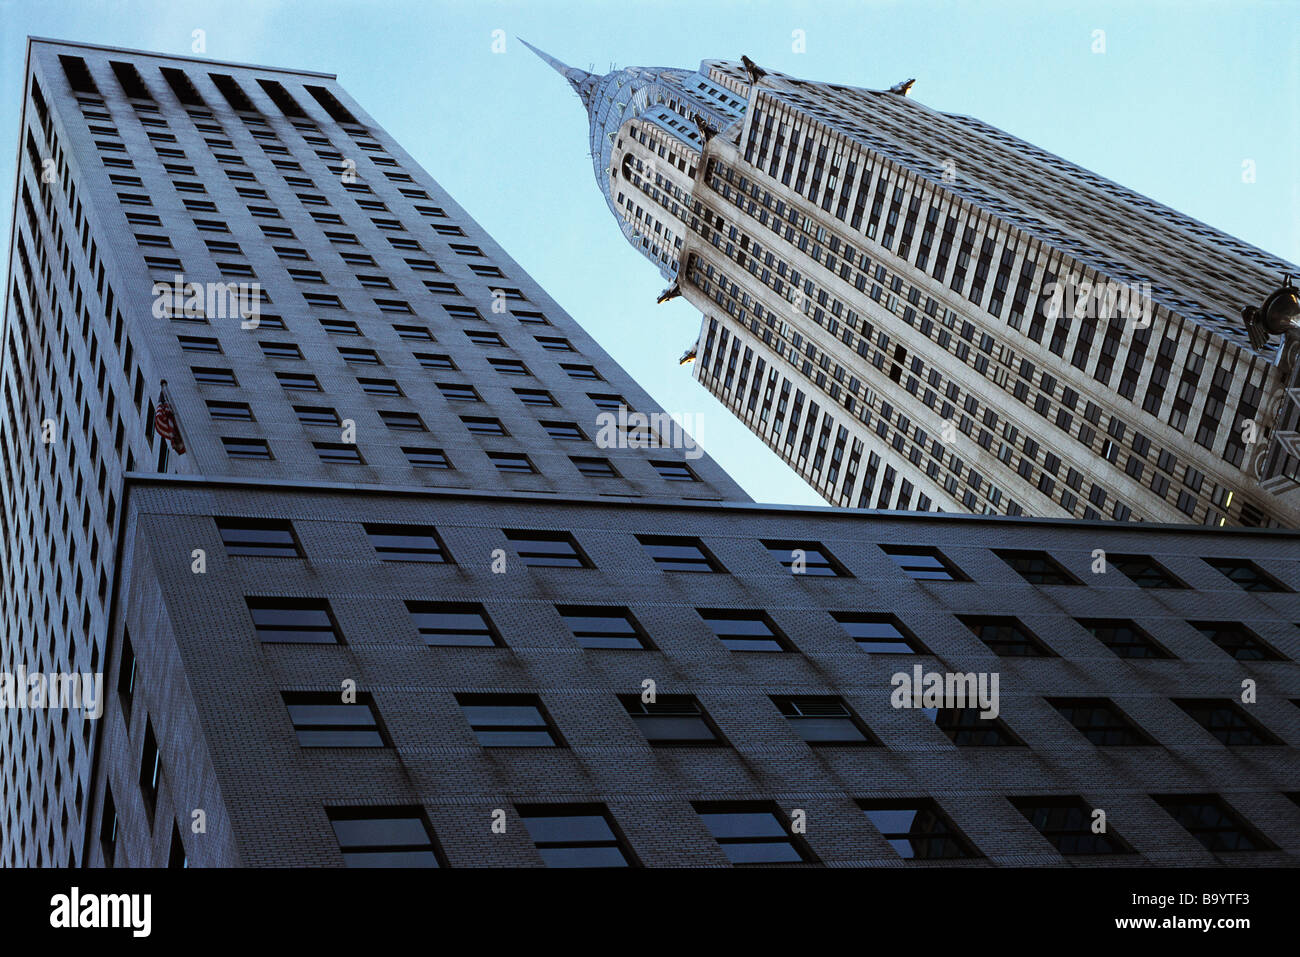 United States, New York City, Manhattan, Chrysler Building, low angle view Stock Photo